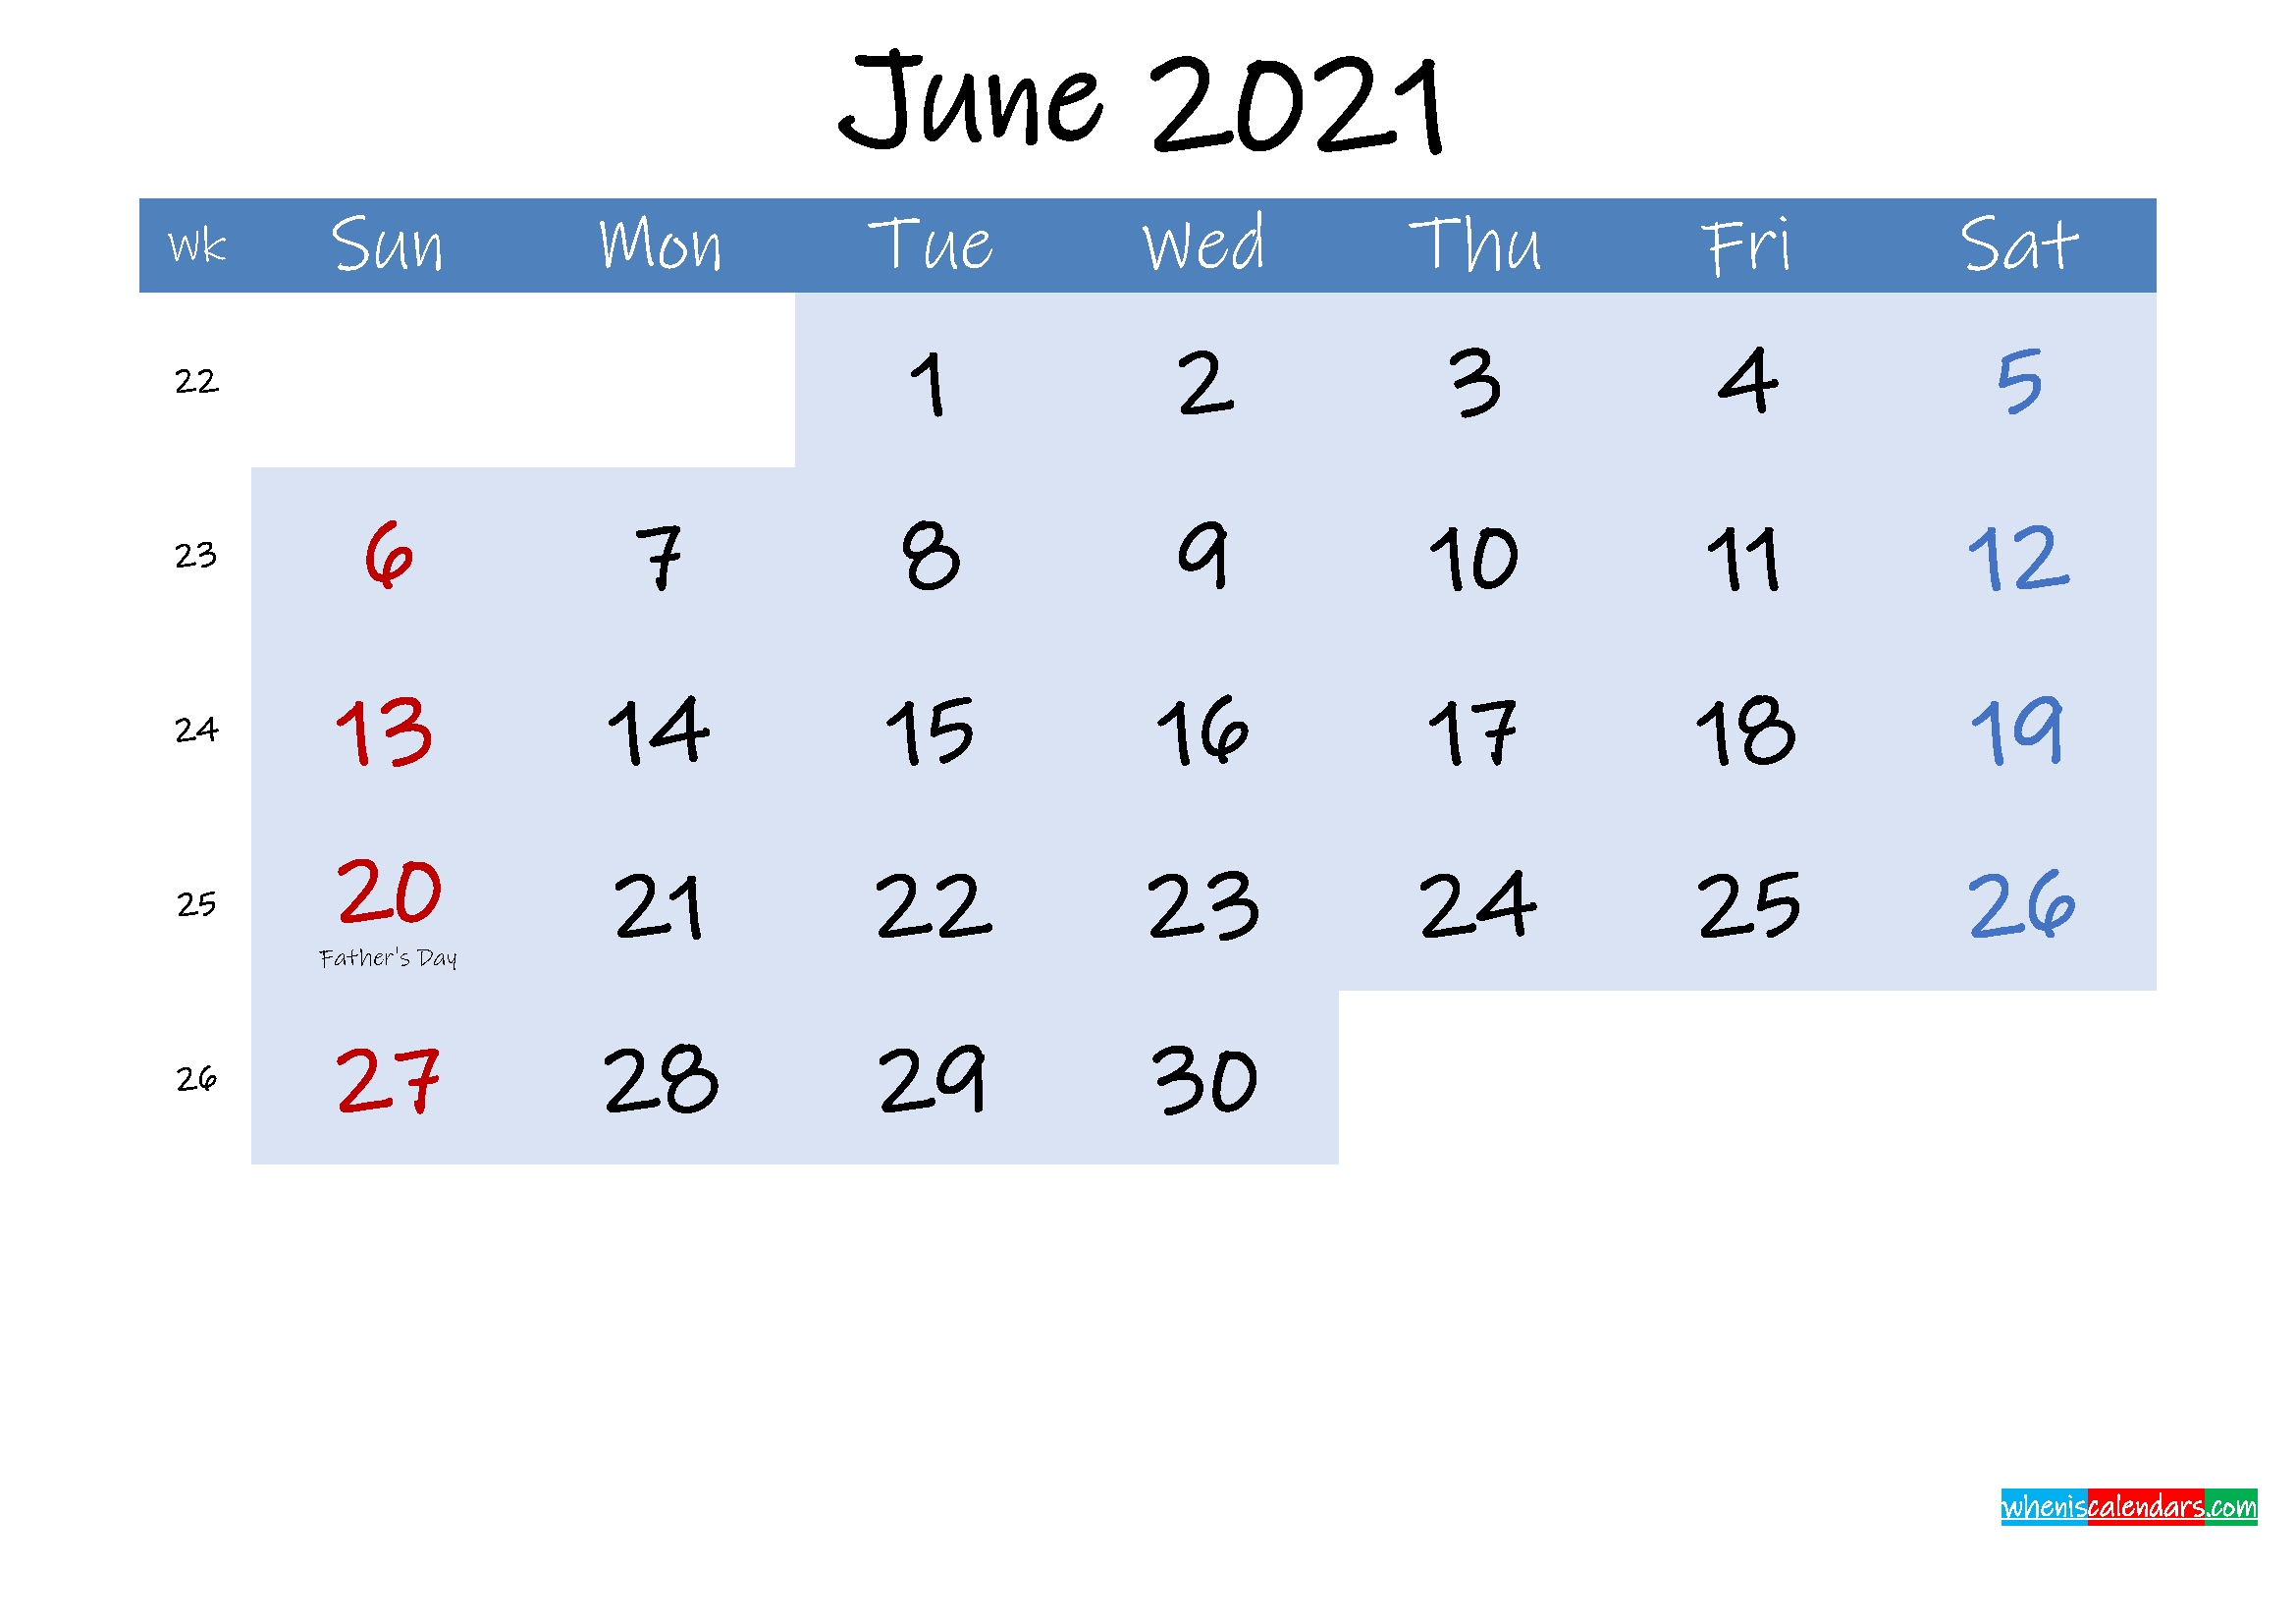 Free June 2021 Monthly Calendar Pdf - Template Ink21M186 - Free Printable 2020 Monthly Calendar Free Printable June 2021 Calendar With Holidays